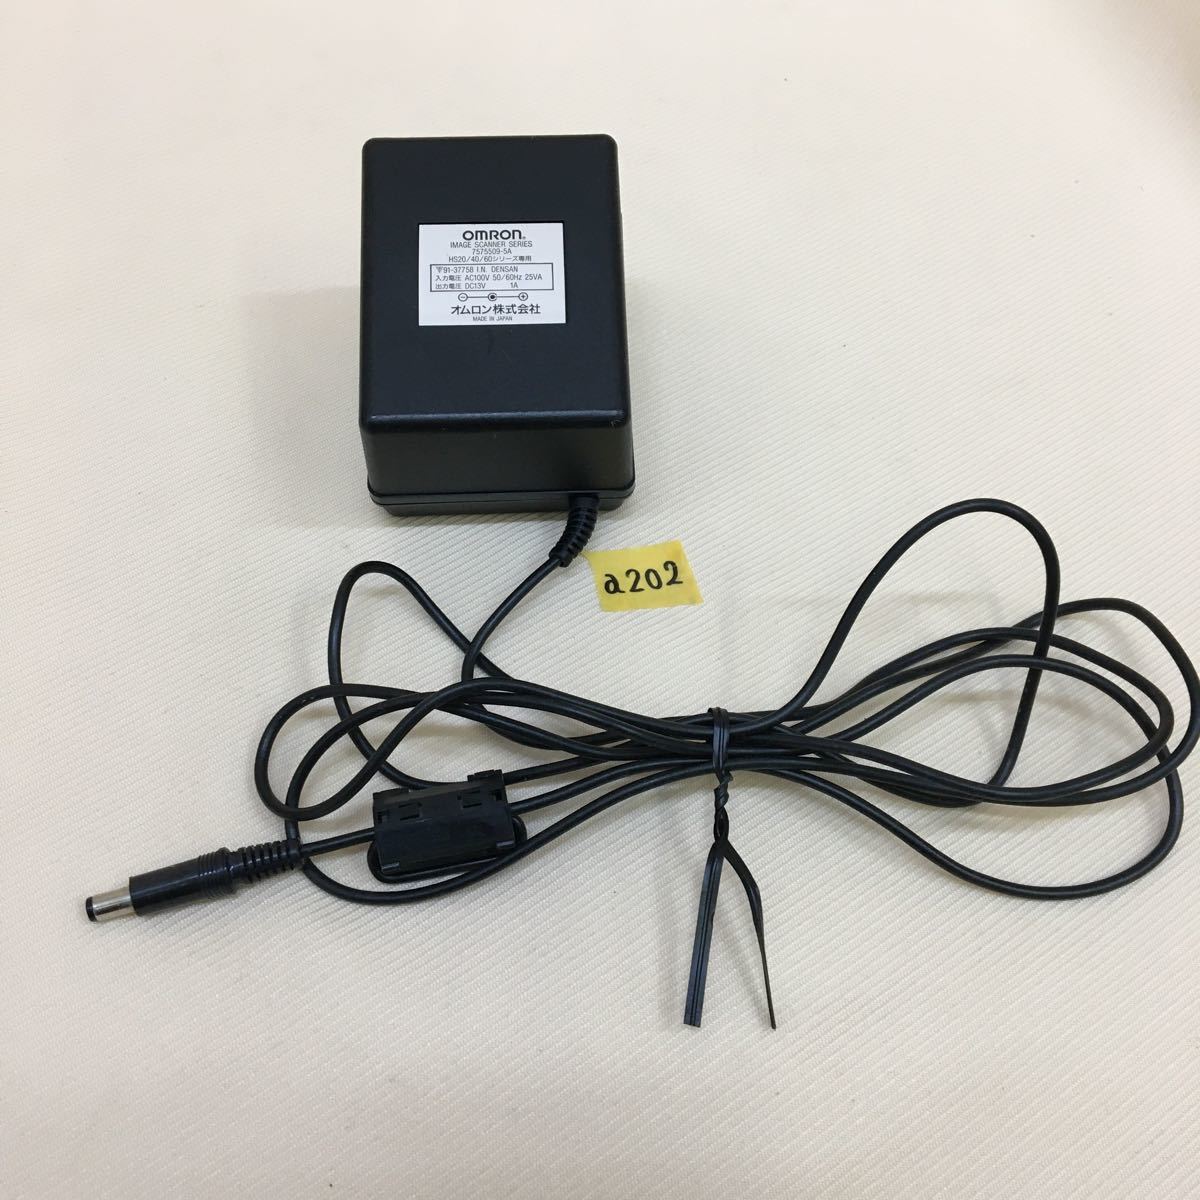 0a2020 OMRON Omron SCANNER SERIES 7575509-5A HS20 40 60 series exclusive use 91-37758 13V 1A AC adaptor AC adapter operation goods 